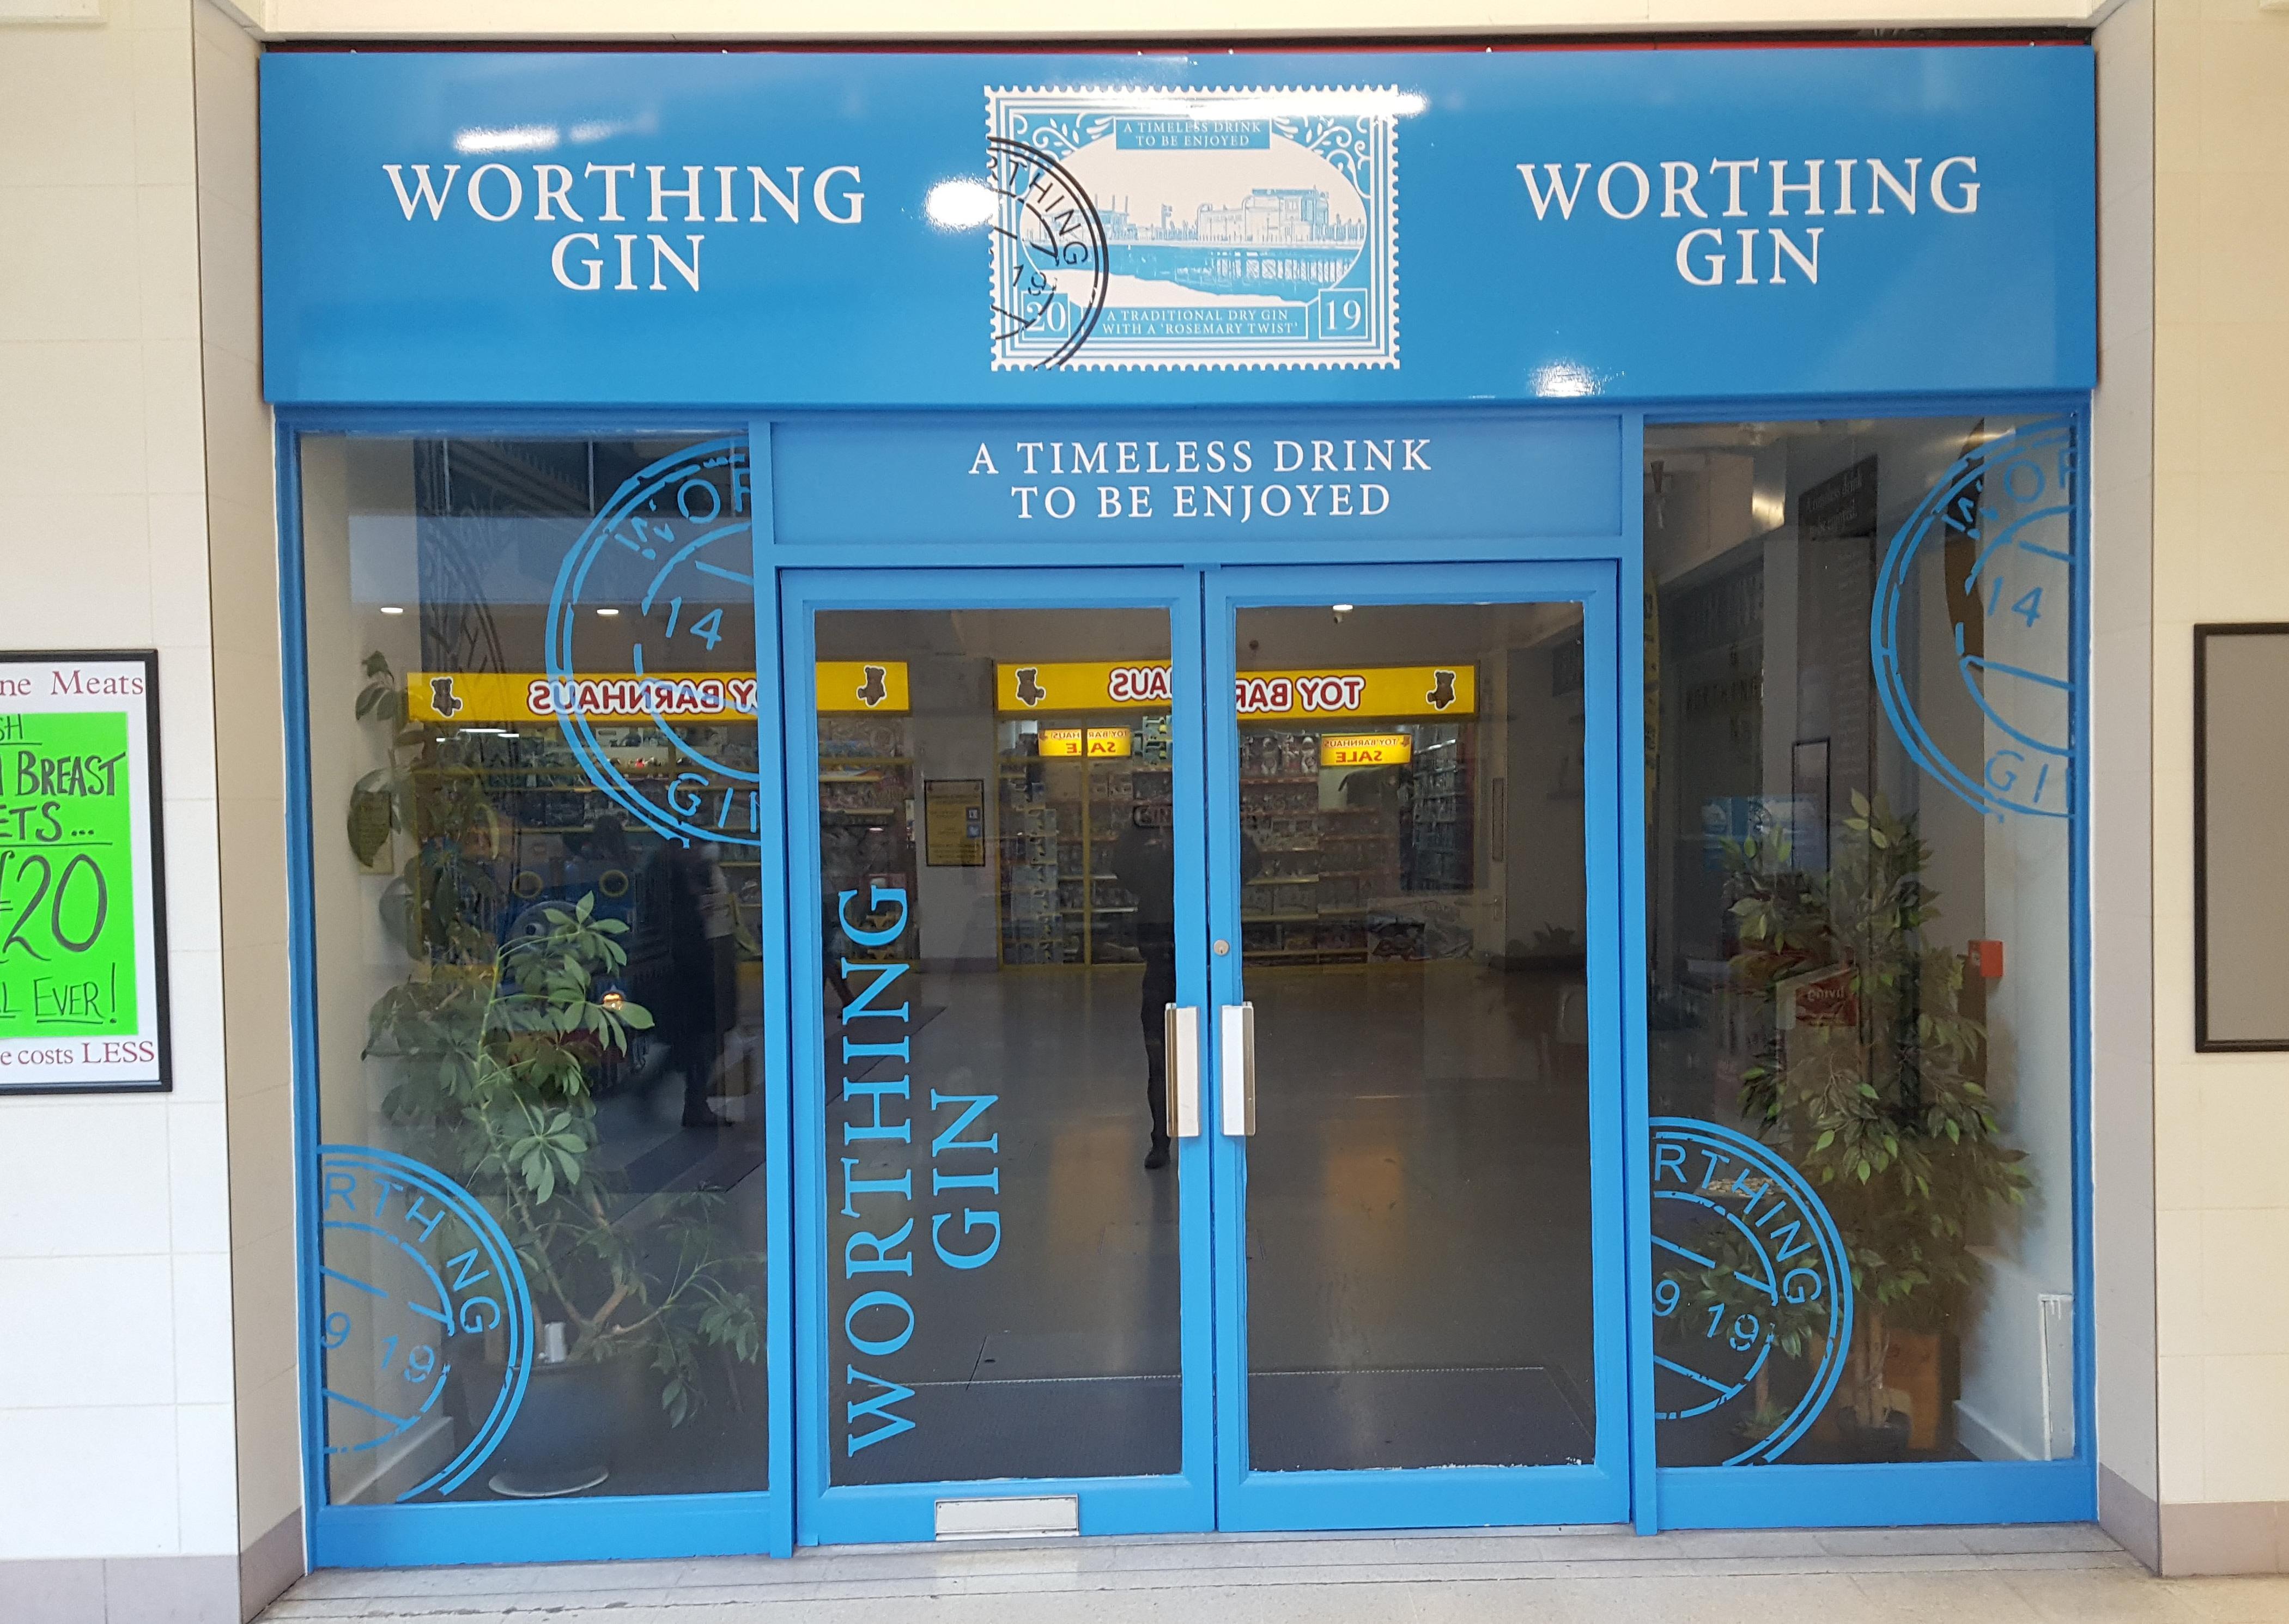 Taking advantage of the festive rush, Worthing Gin opened in the Guildbourne Centre shortly before Christmas last year